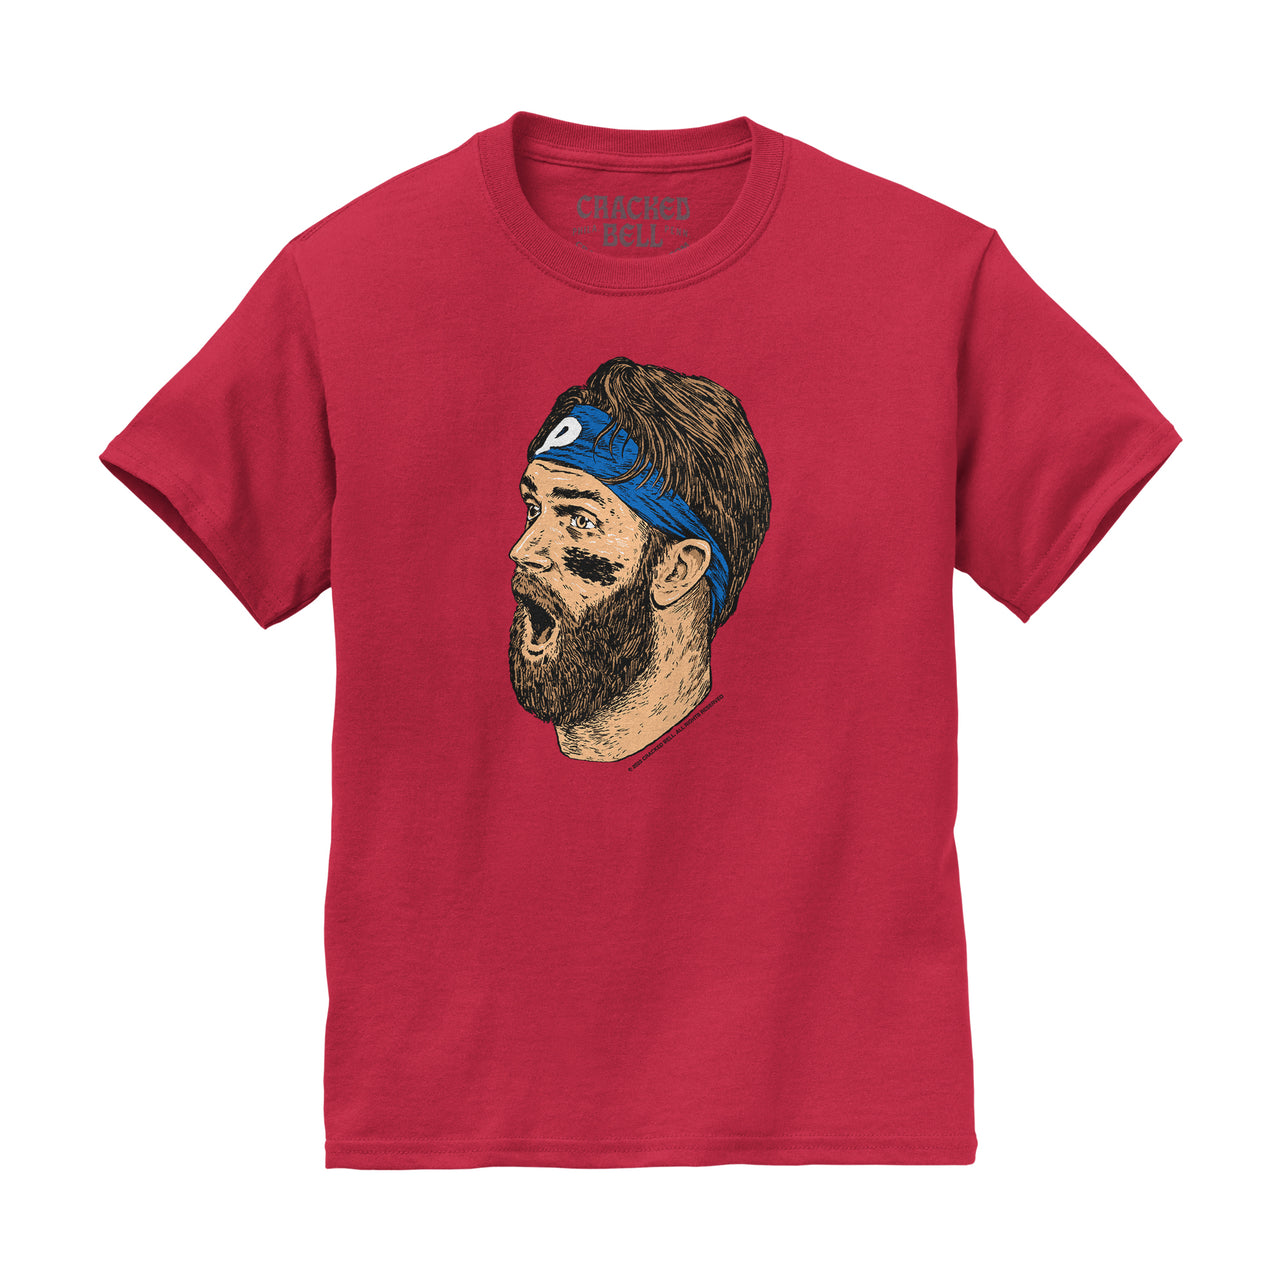 "WOW Red" Youth & Toddler Shirt